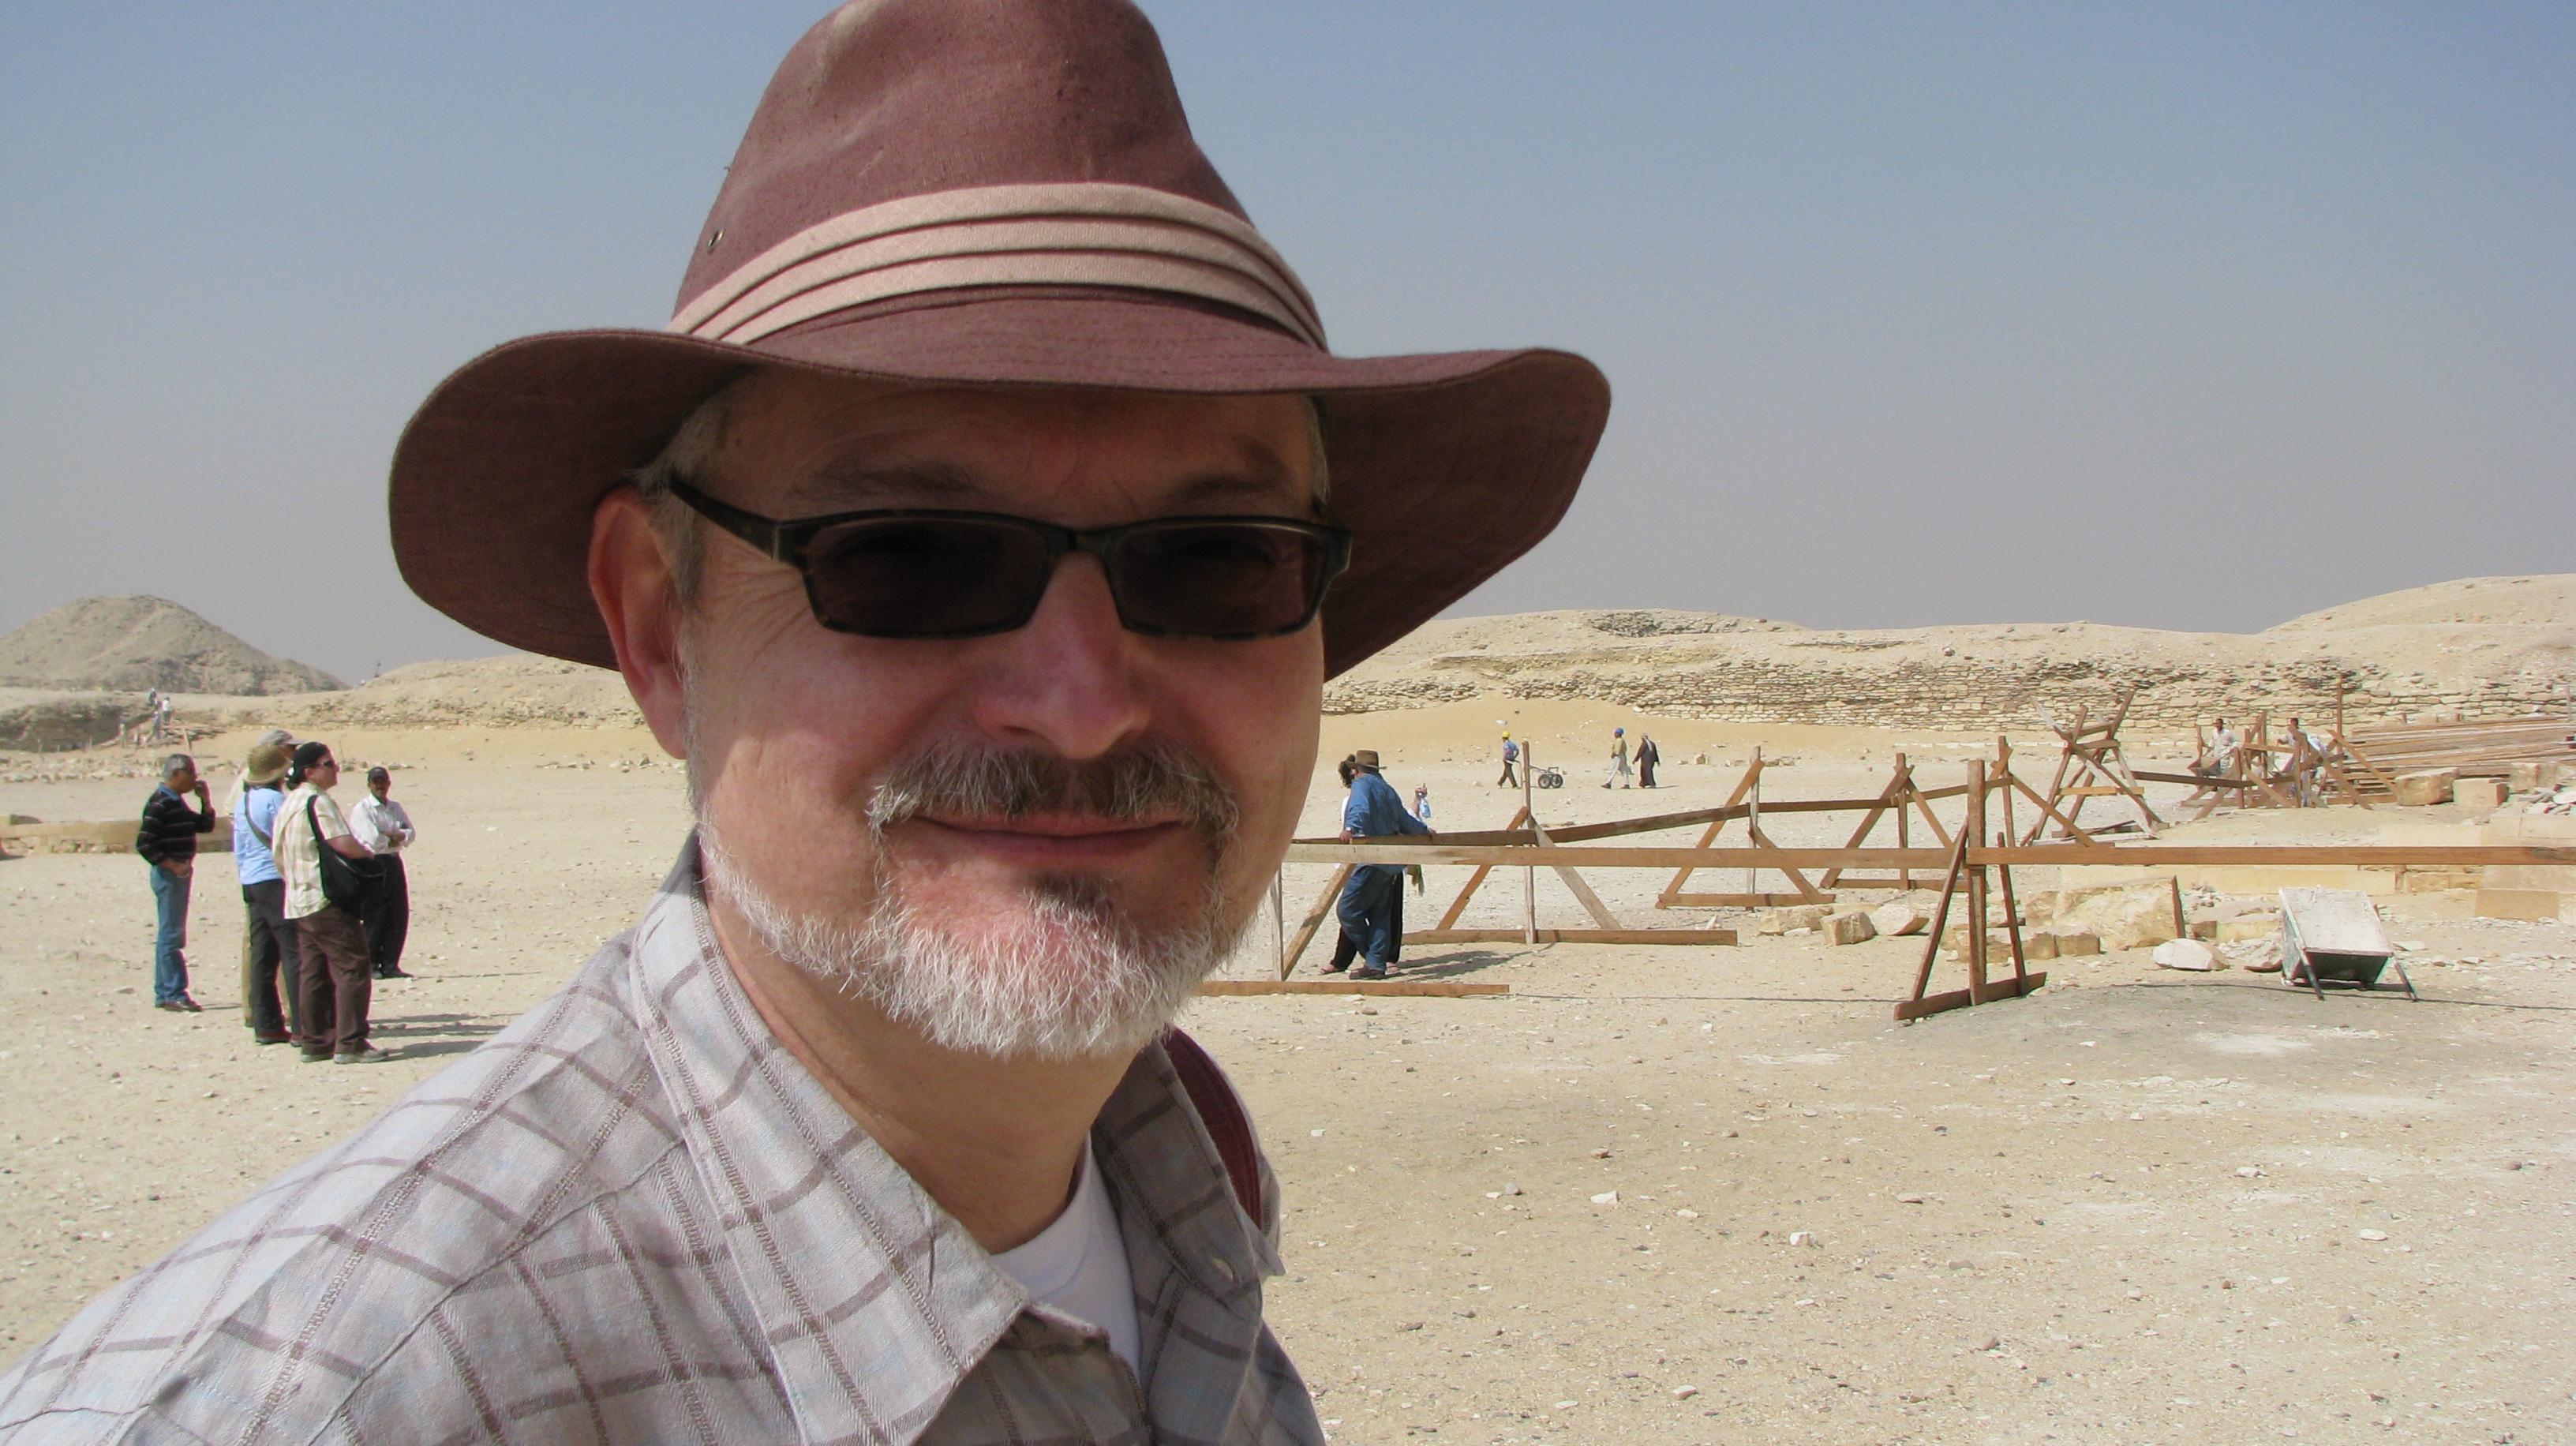 Screenwriter and author Skip Berry during a visit to Egypt.